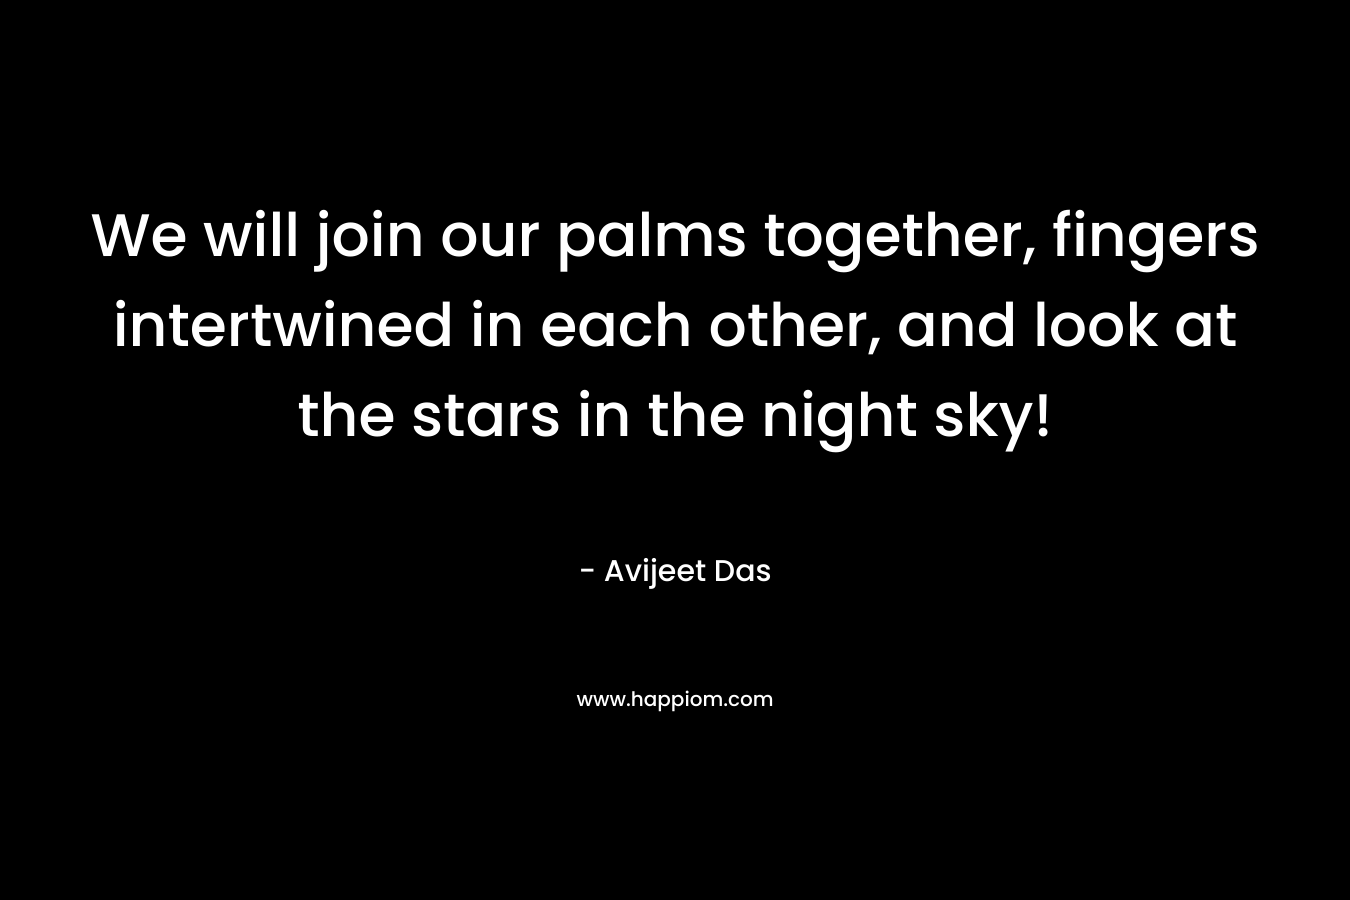 We will join our palms together, fingers intertwined in each other, and look at the stars in the night sky!